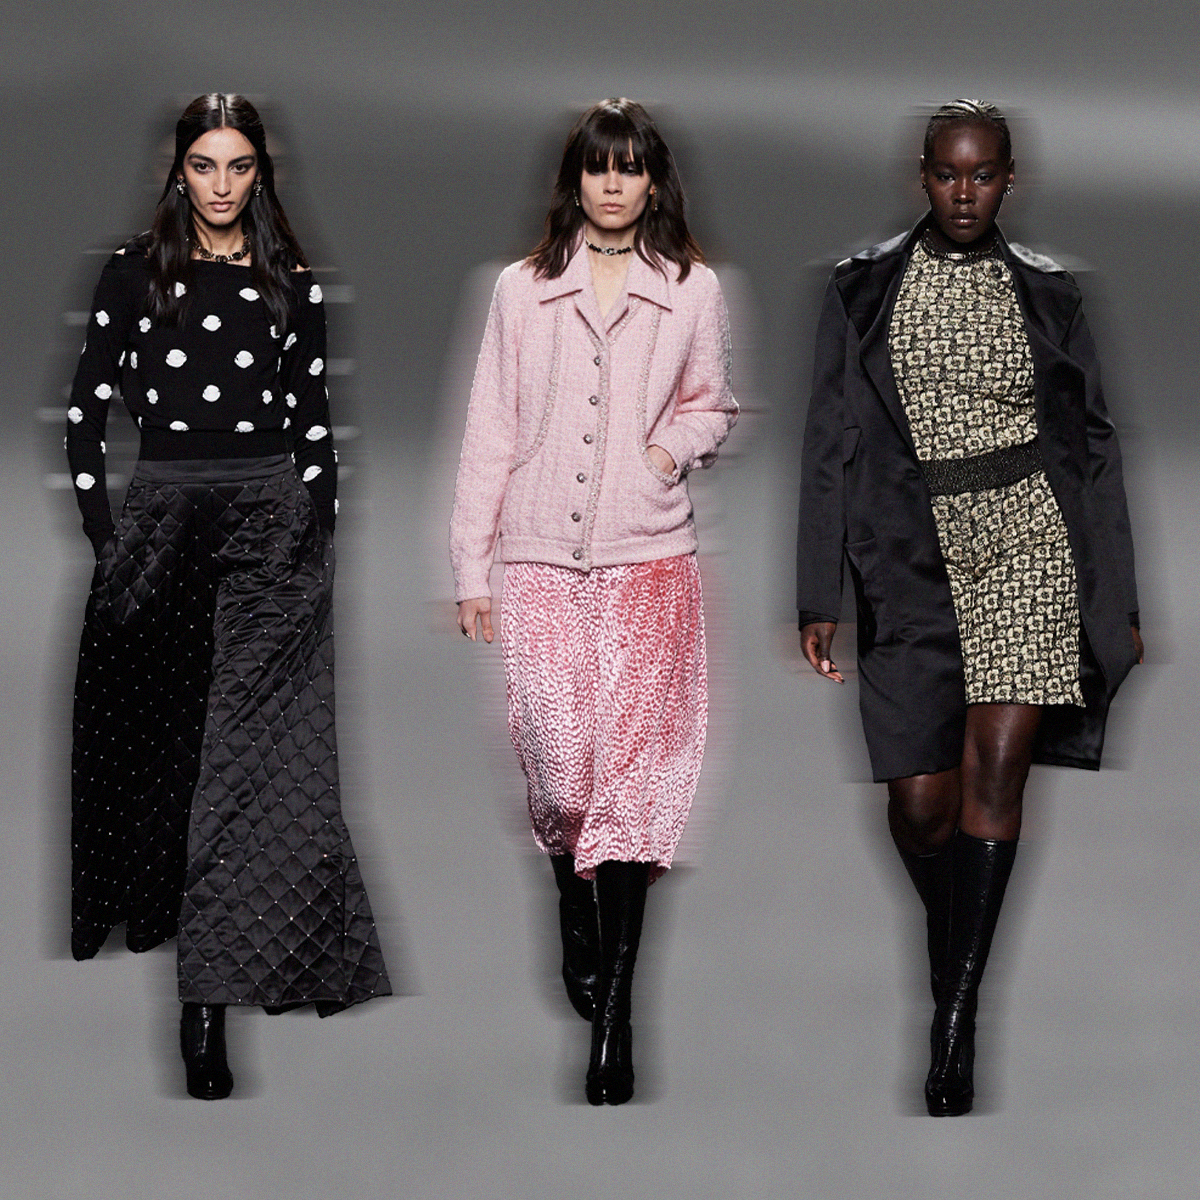 7 Winter Outfit Ideas Inspired by the Chanel Runways